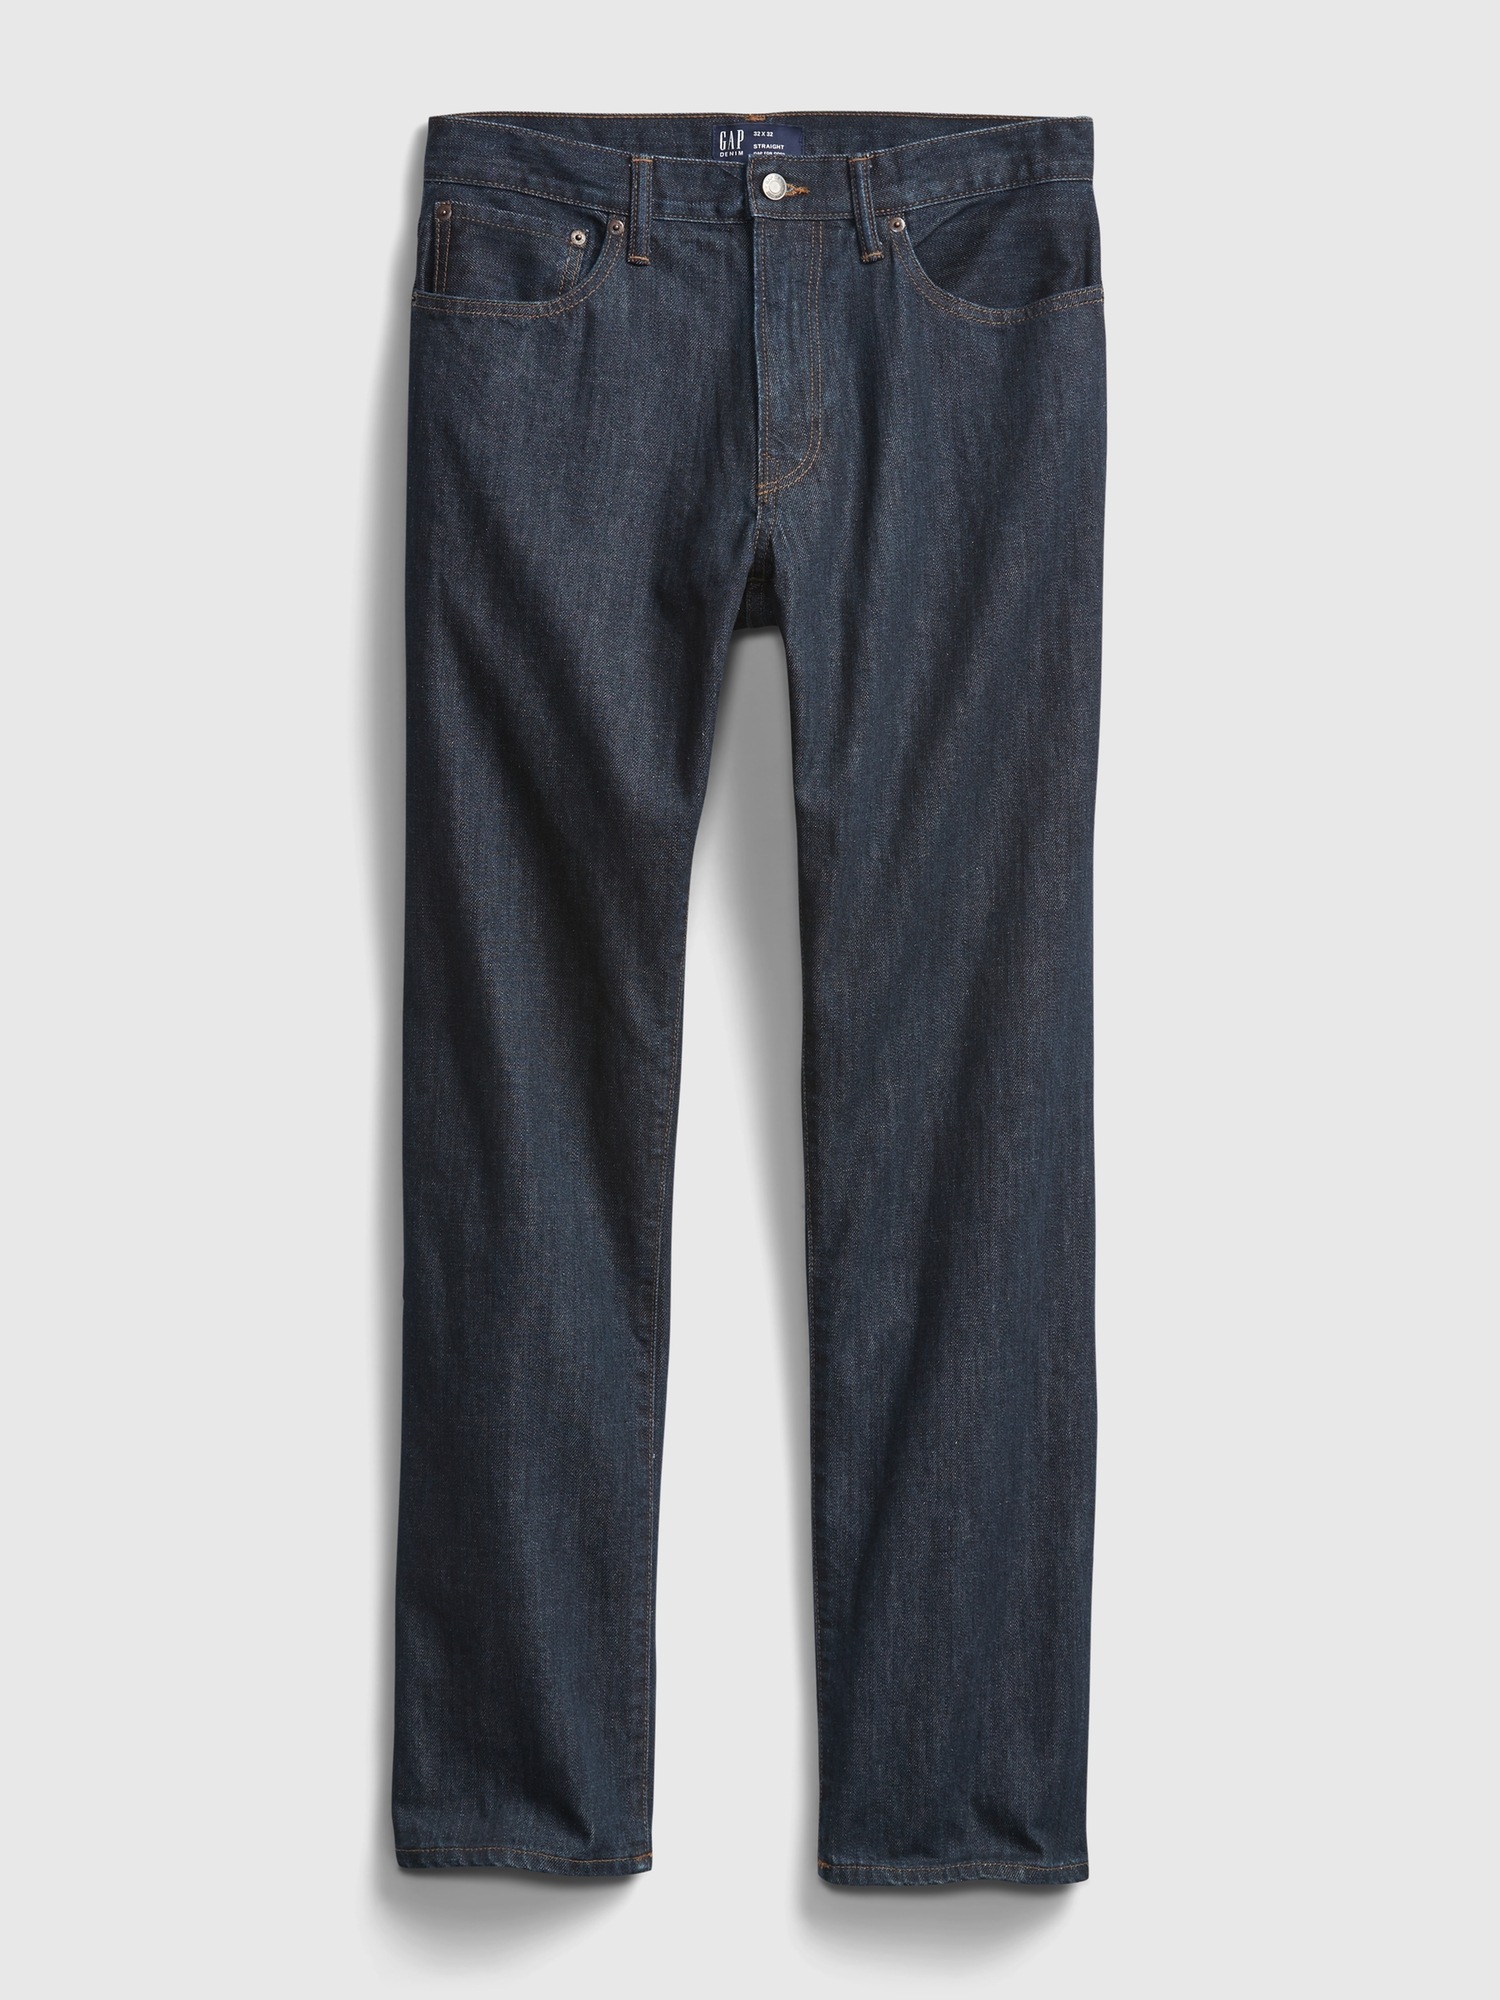 gap straight fit jeans mens